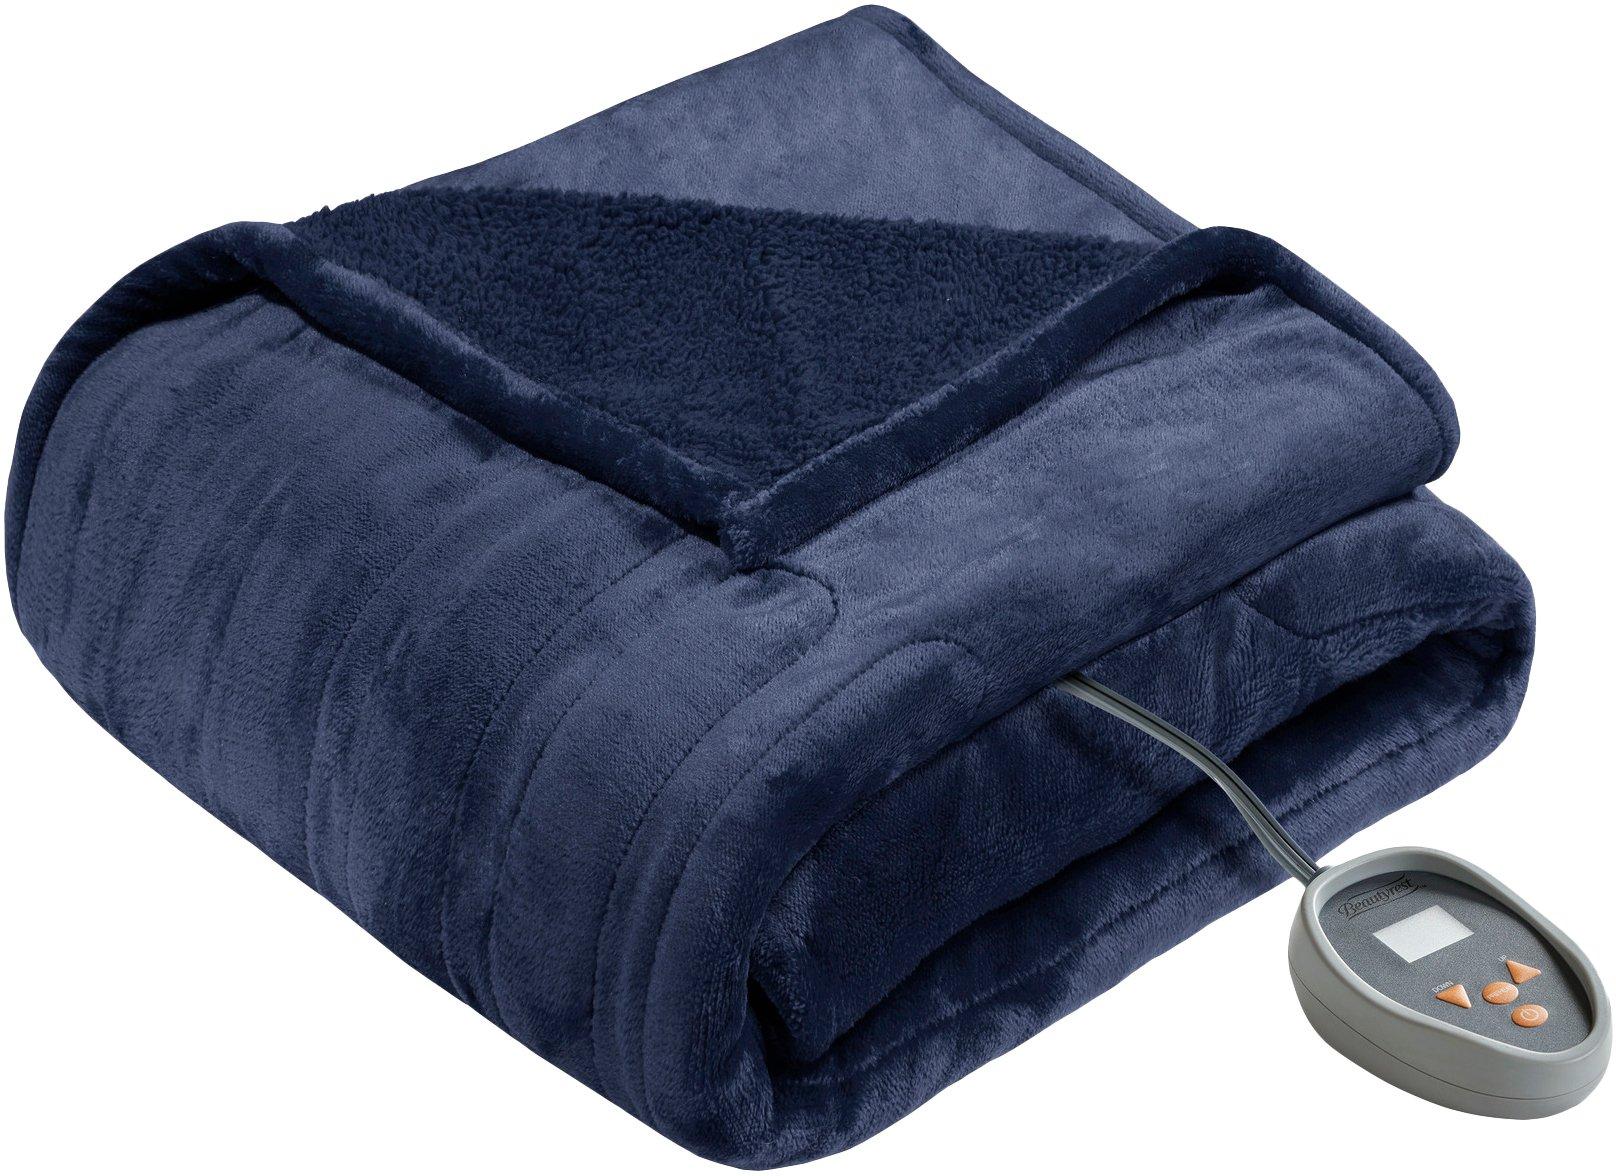 Beautyrest Heated Microlight to Berber Electric Blanket